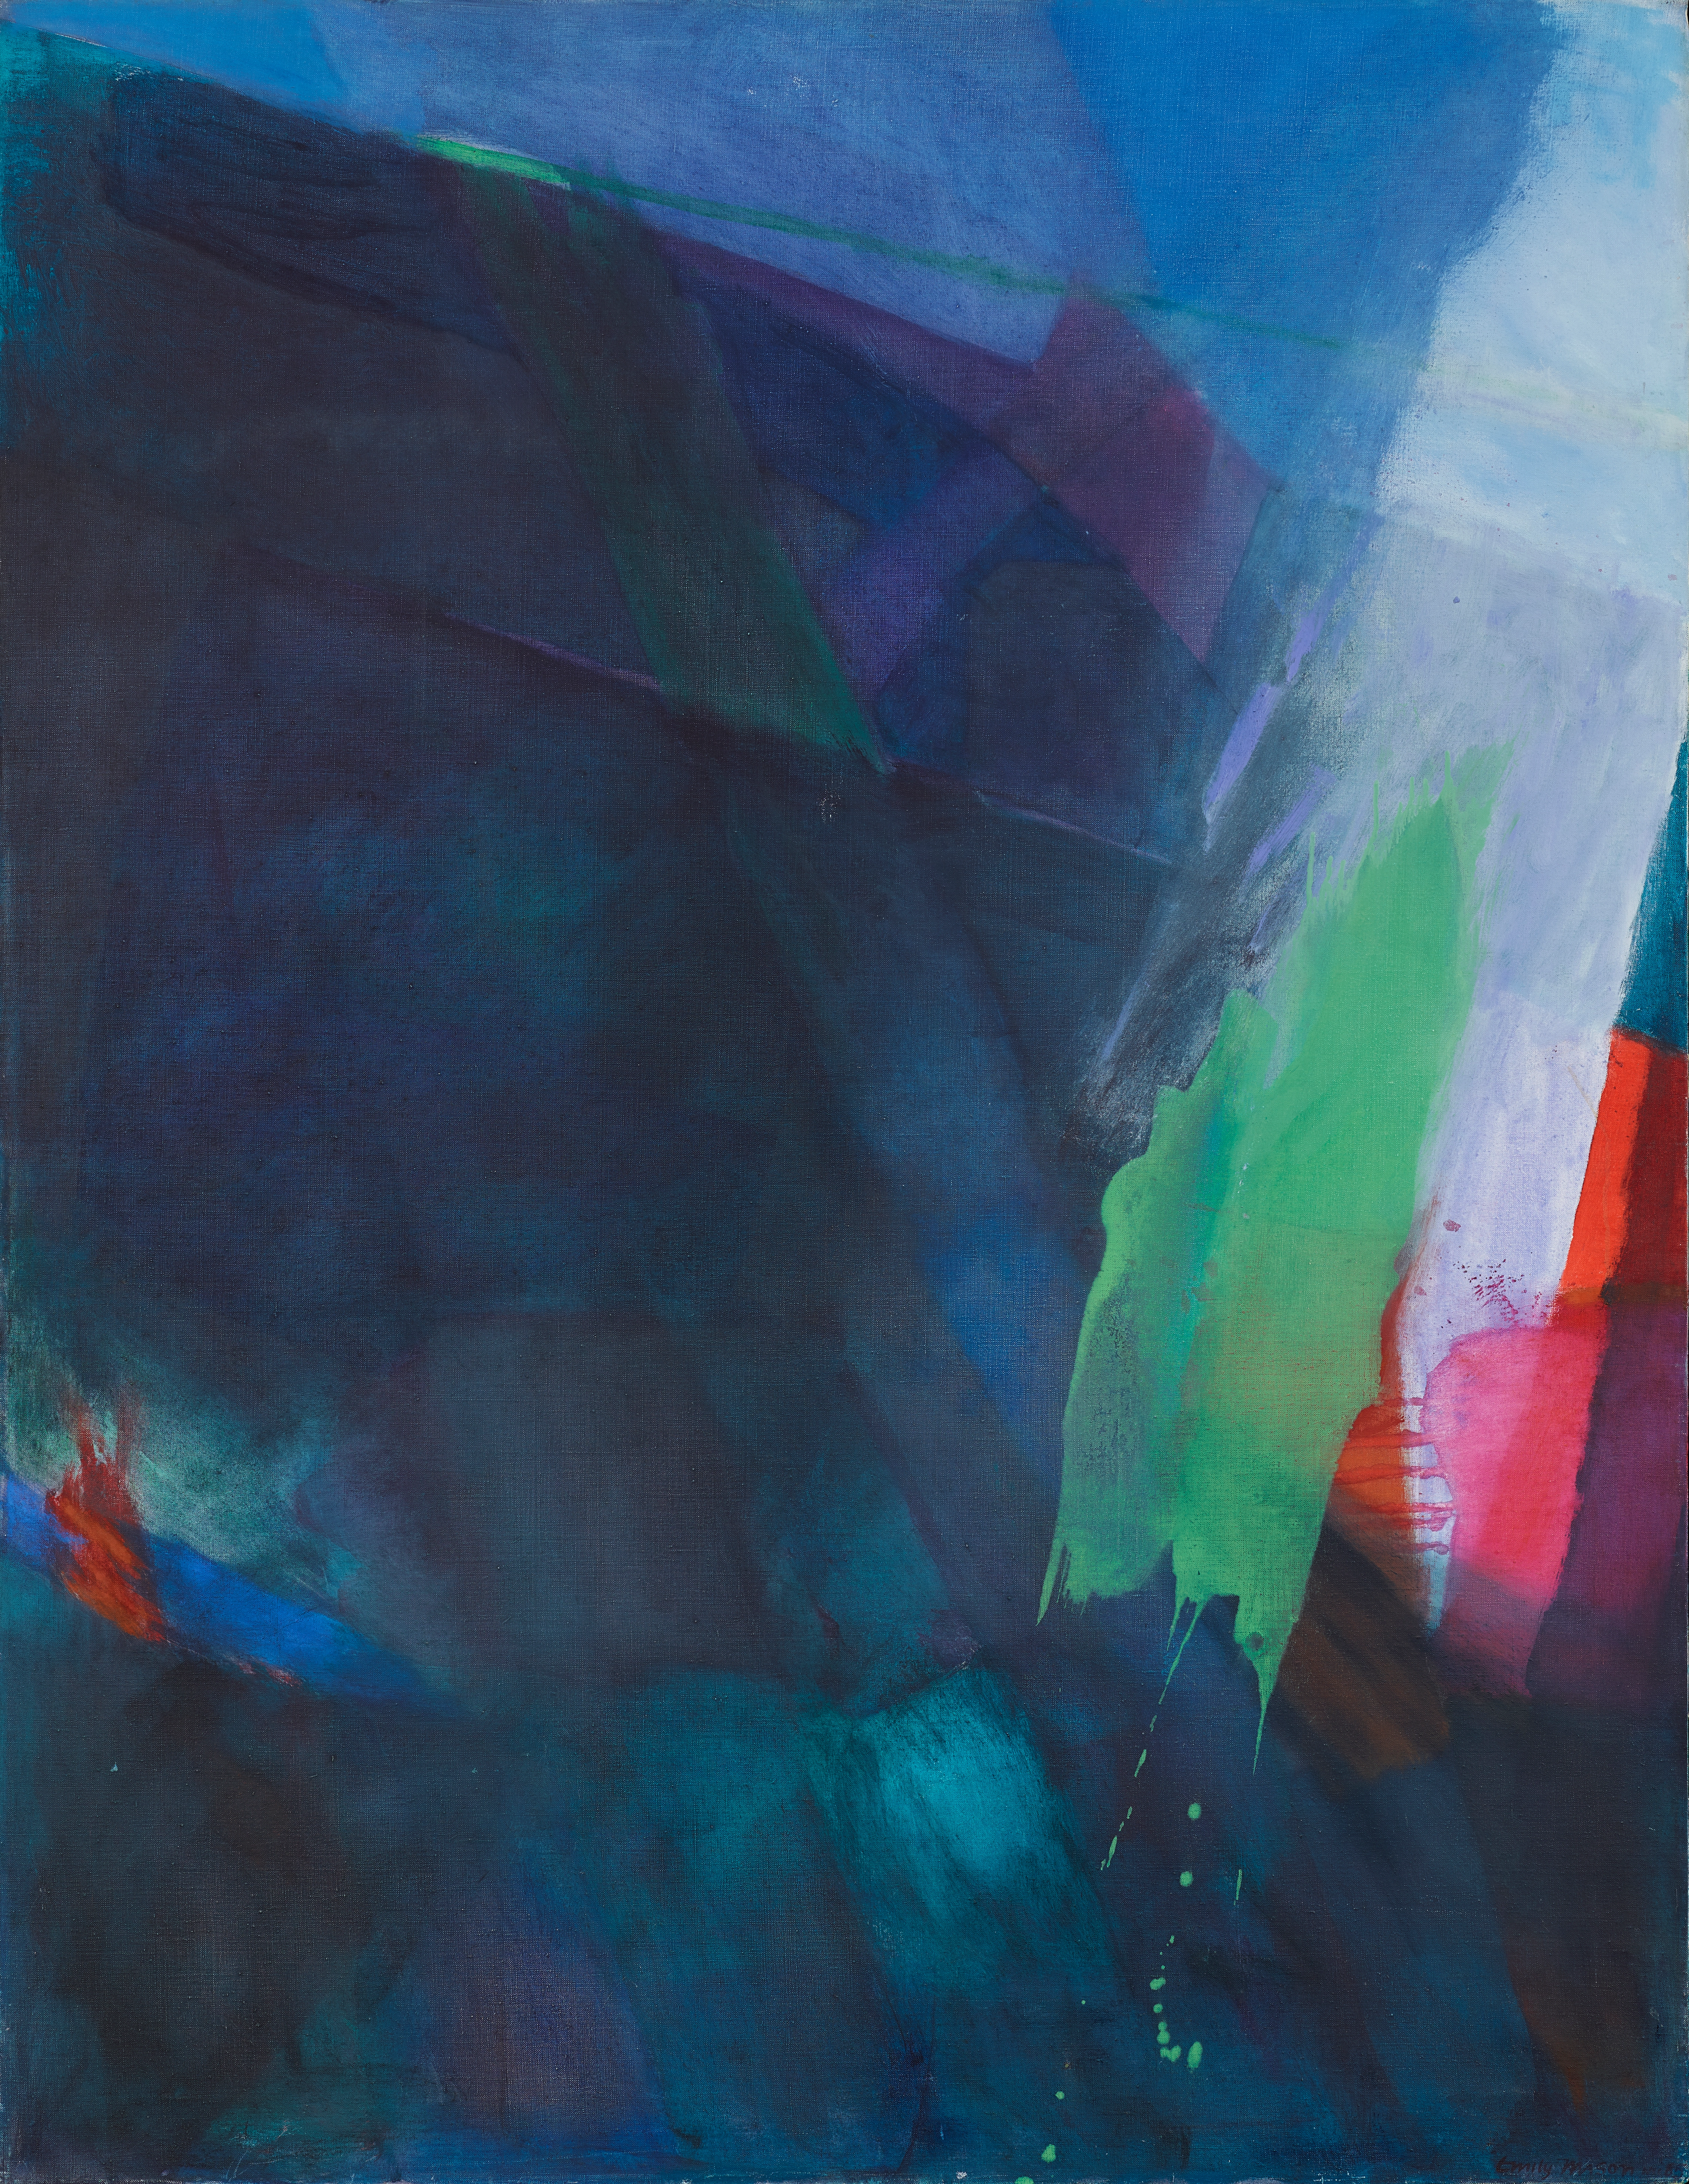 Abstract oil painting of dark blues, purples, and magentas, with a streak of white and green entering the composition from the upper right corner and dripping towards the bottom center.